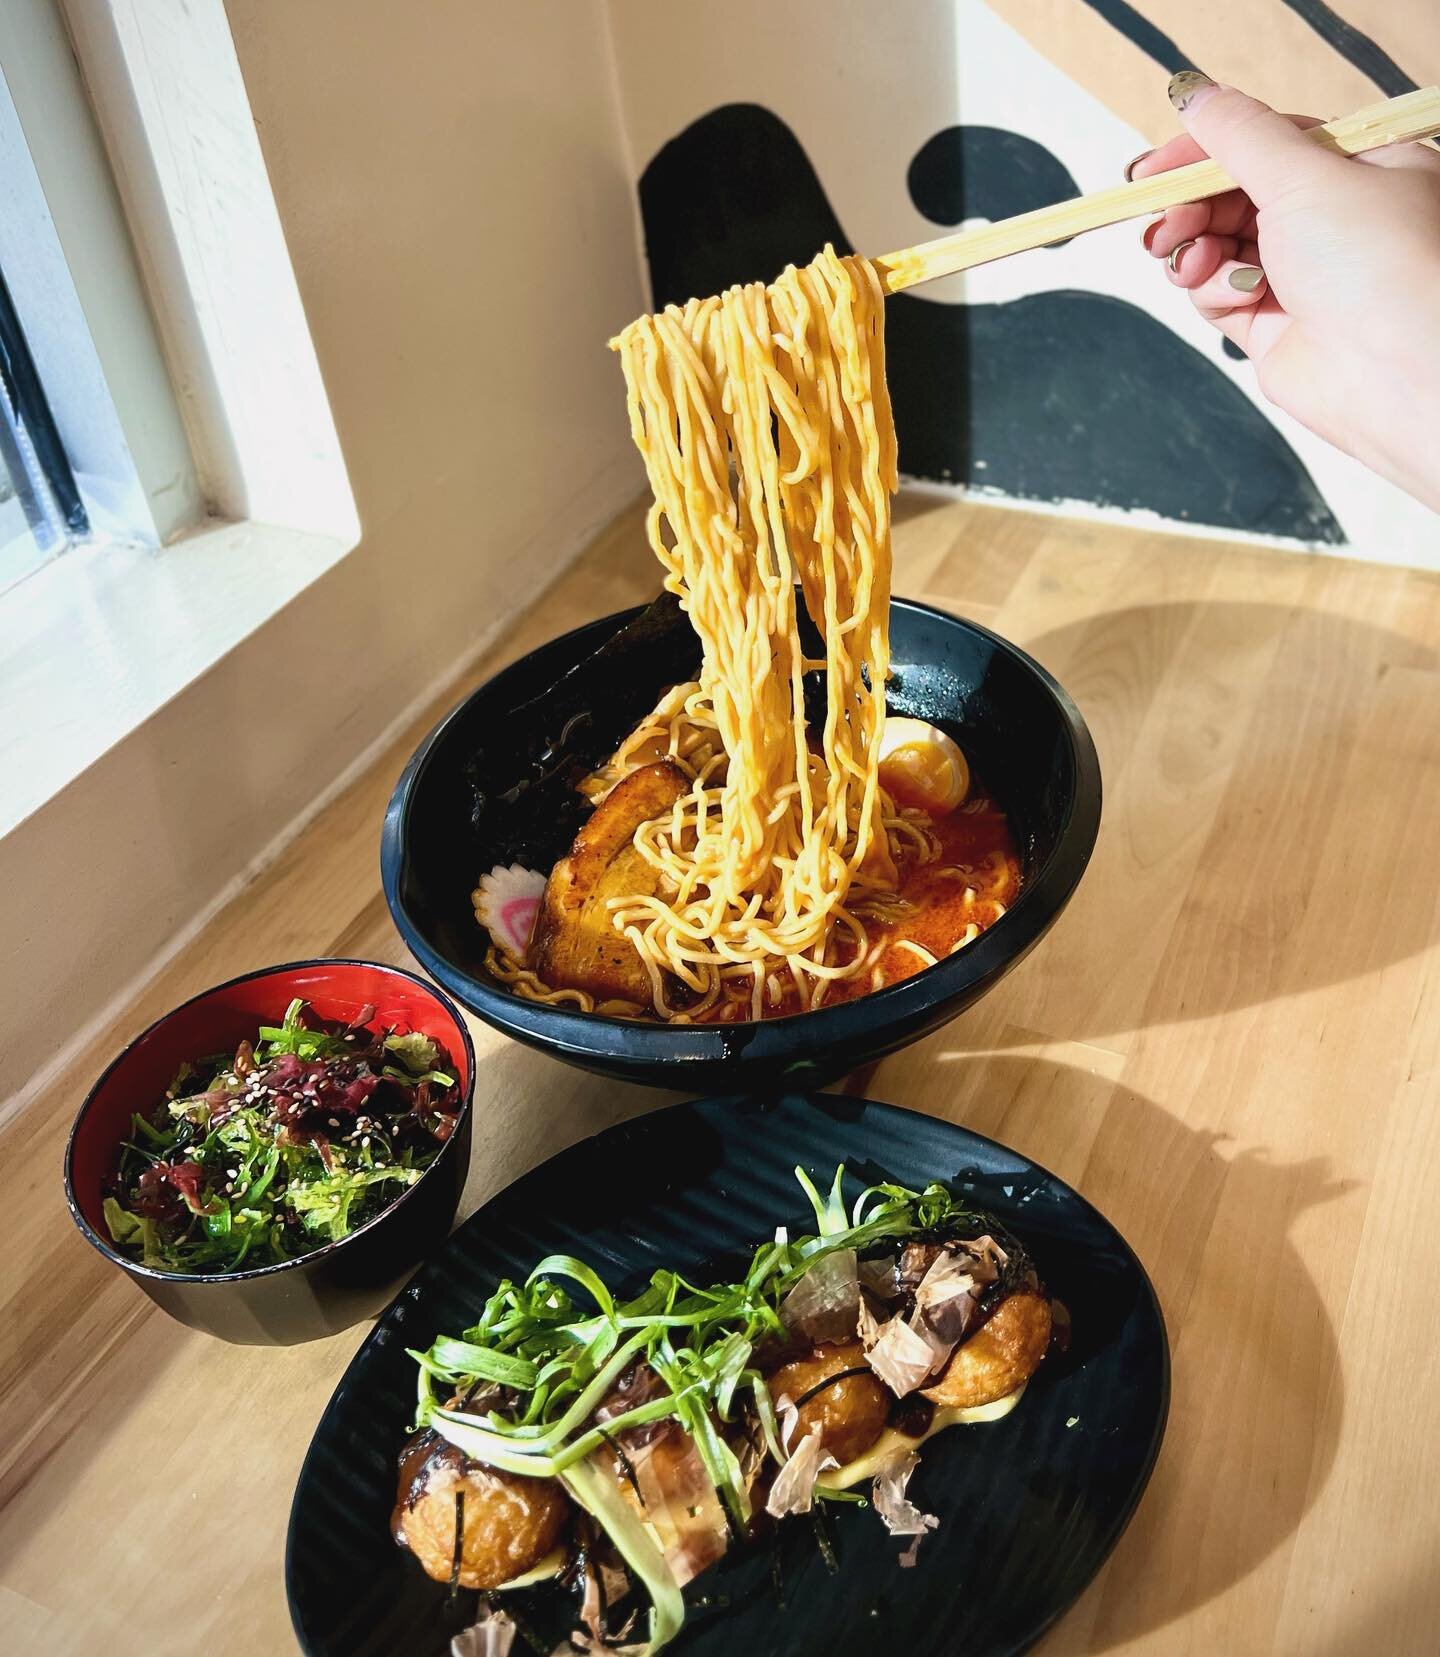 Spice up your chilly day with our spicy miso ramen, tantalizing Takoyaki and refreshing Seaweed salad !
Embrace the warmth at Noodsbar where every bite is a bowlful of comfort 🍜🌶️🐙

#ramen #japaneseramen #noodles #ranchocucamonga #rancho #foodporn